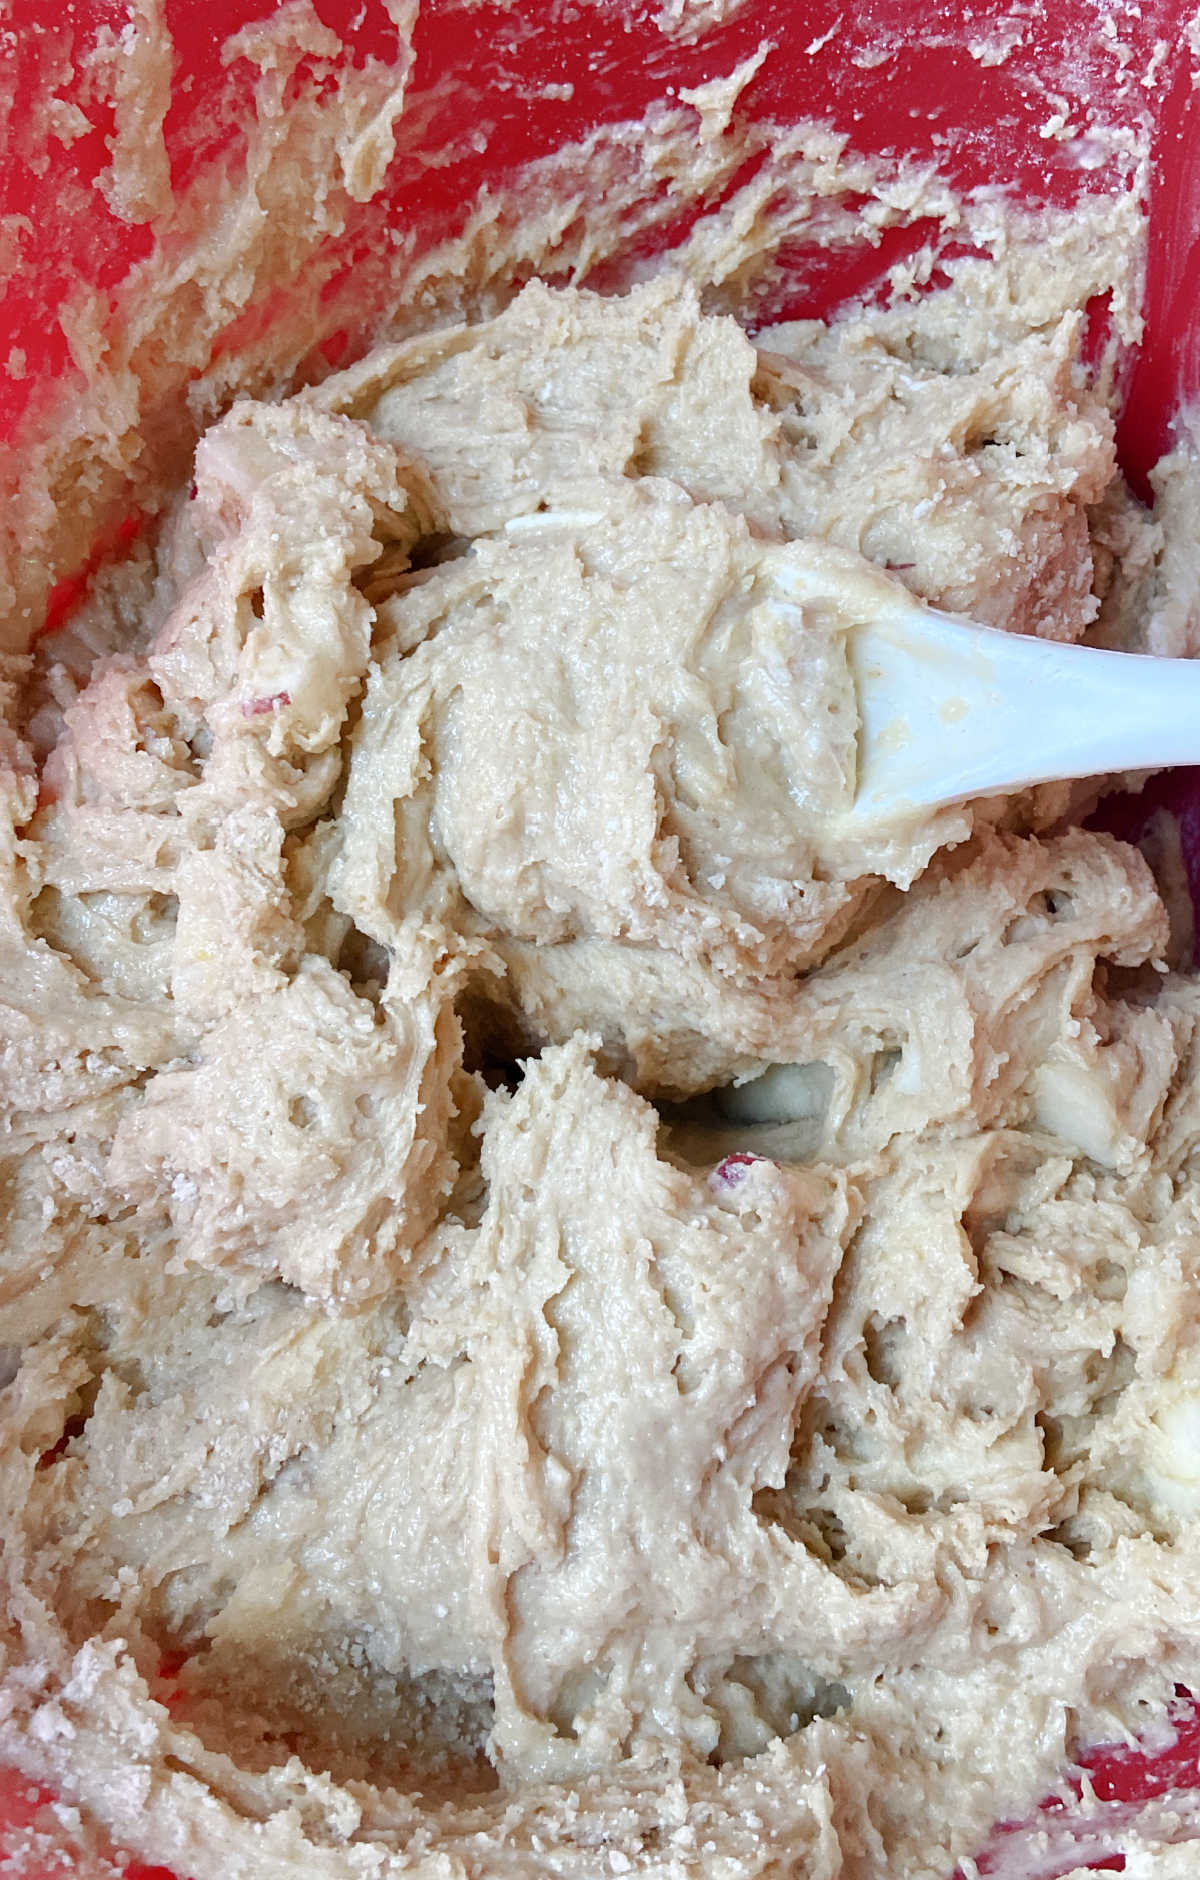 coffee cake batter in a red bowl.